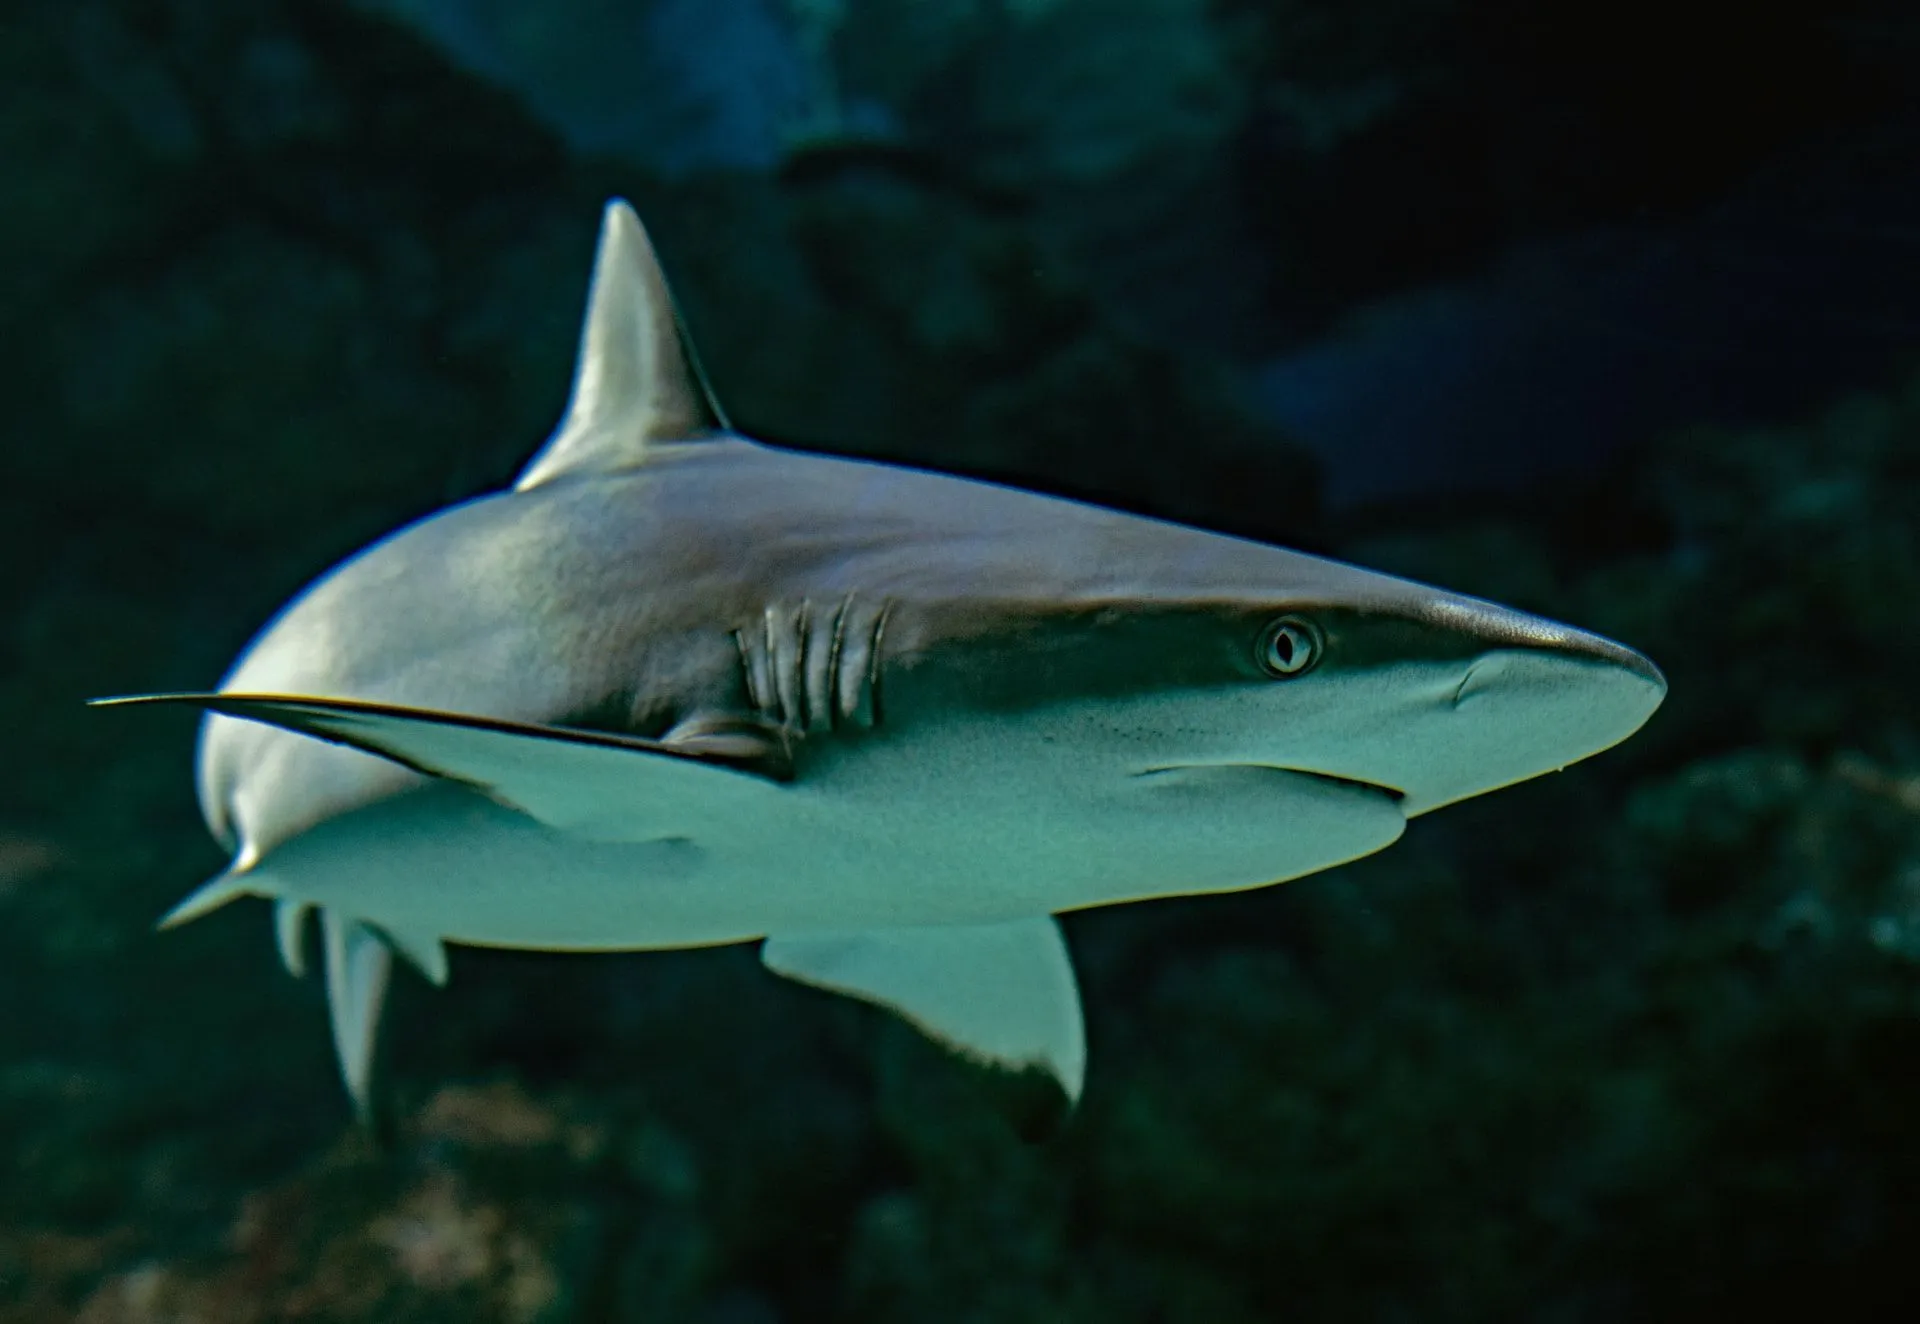 Cartilage supports the buoyancy of sharks in the water.